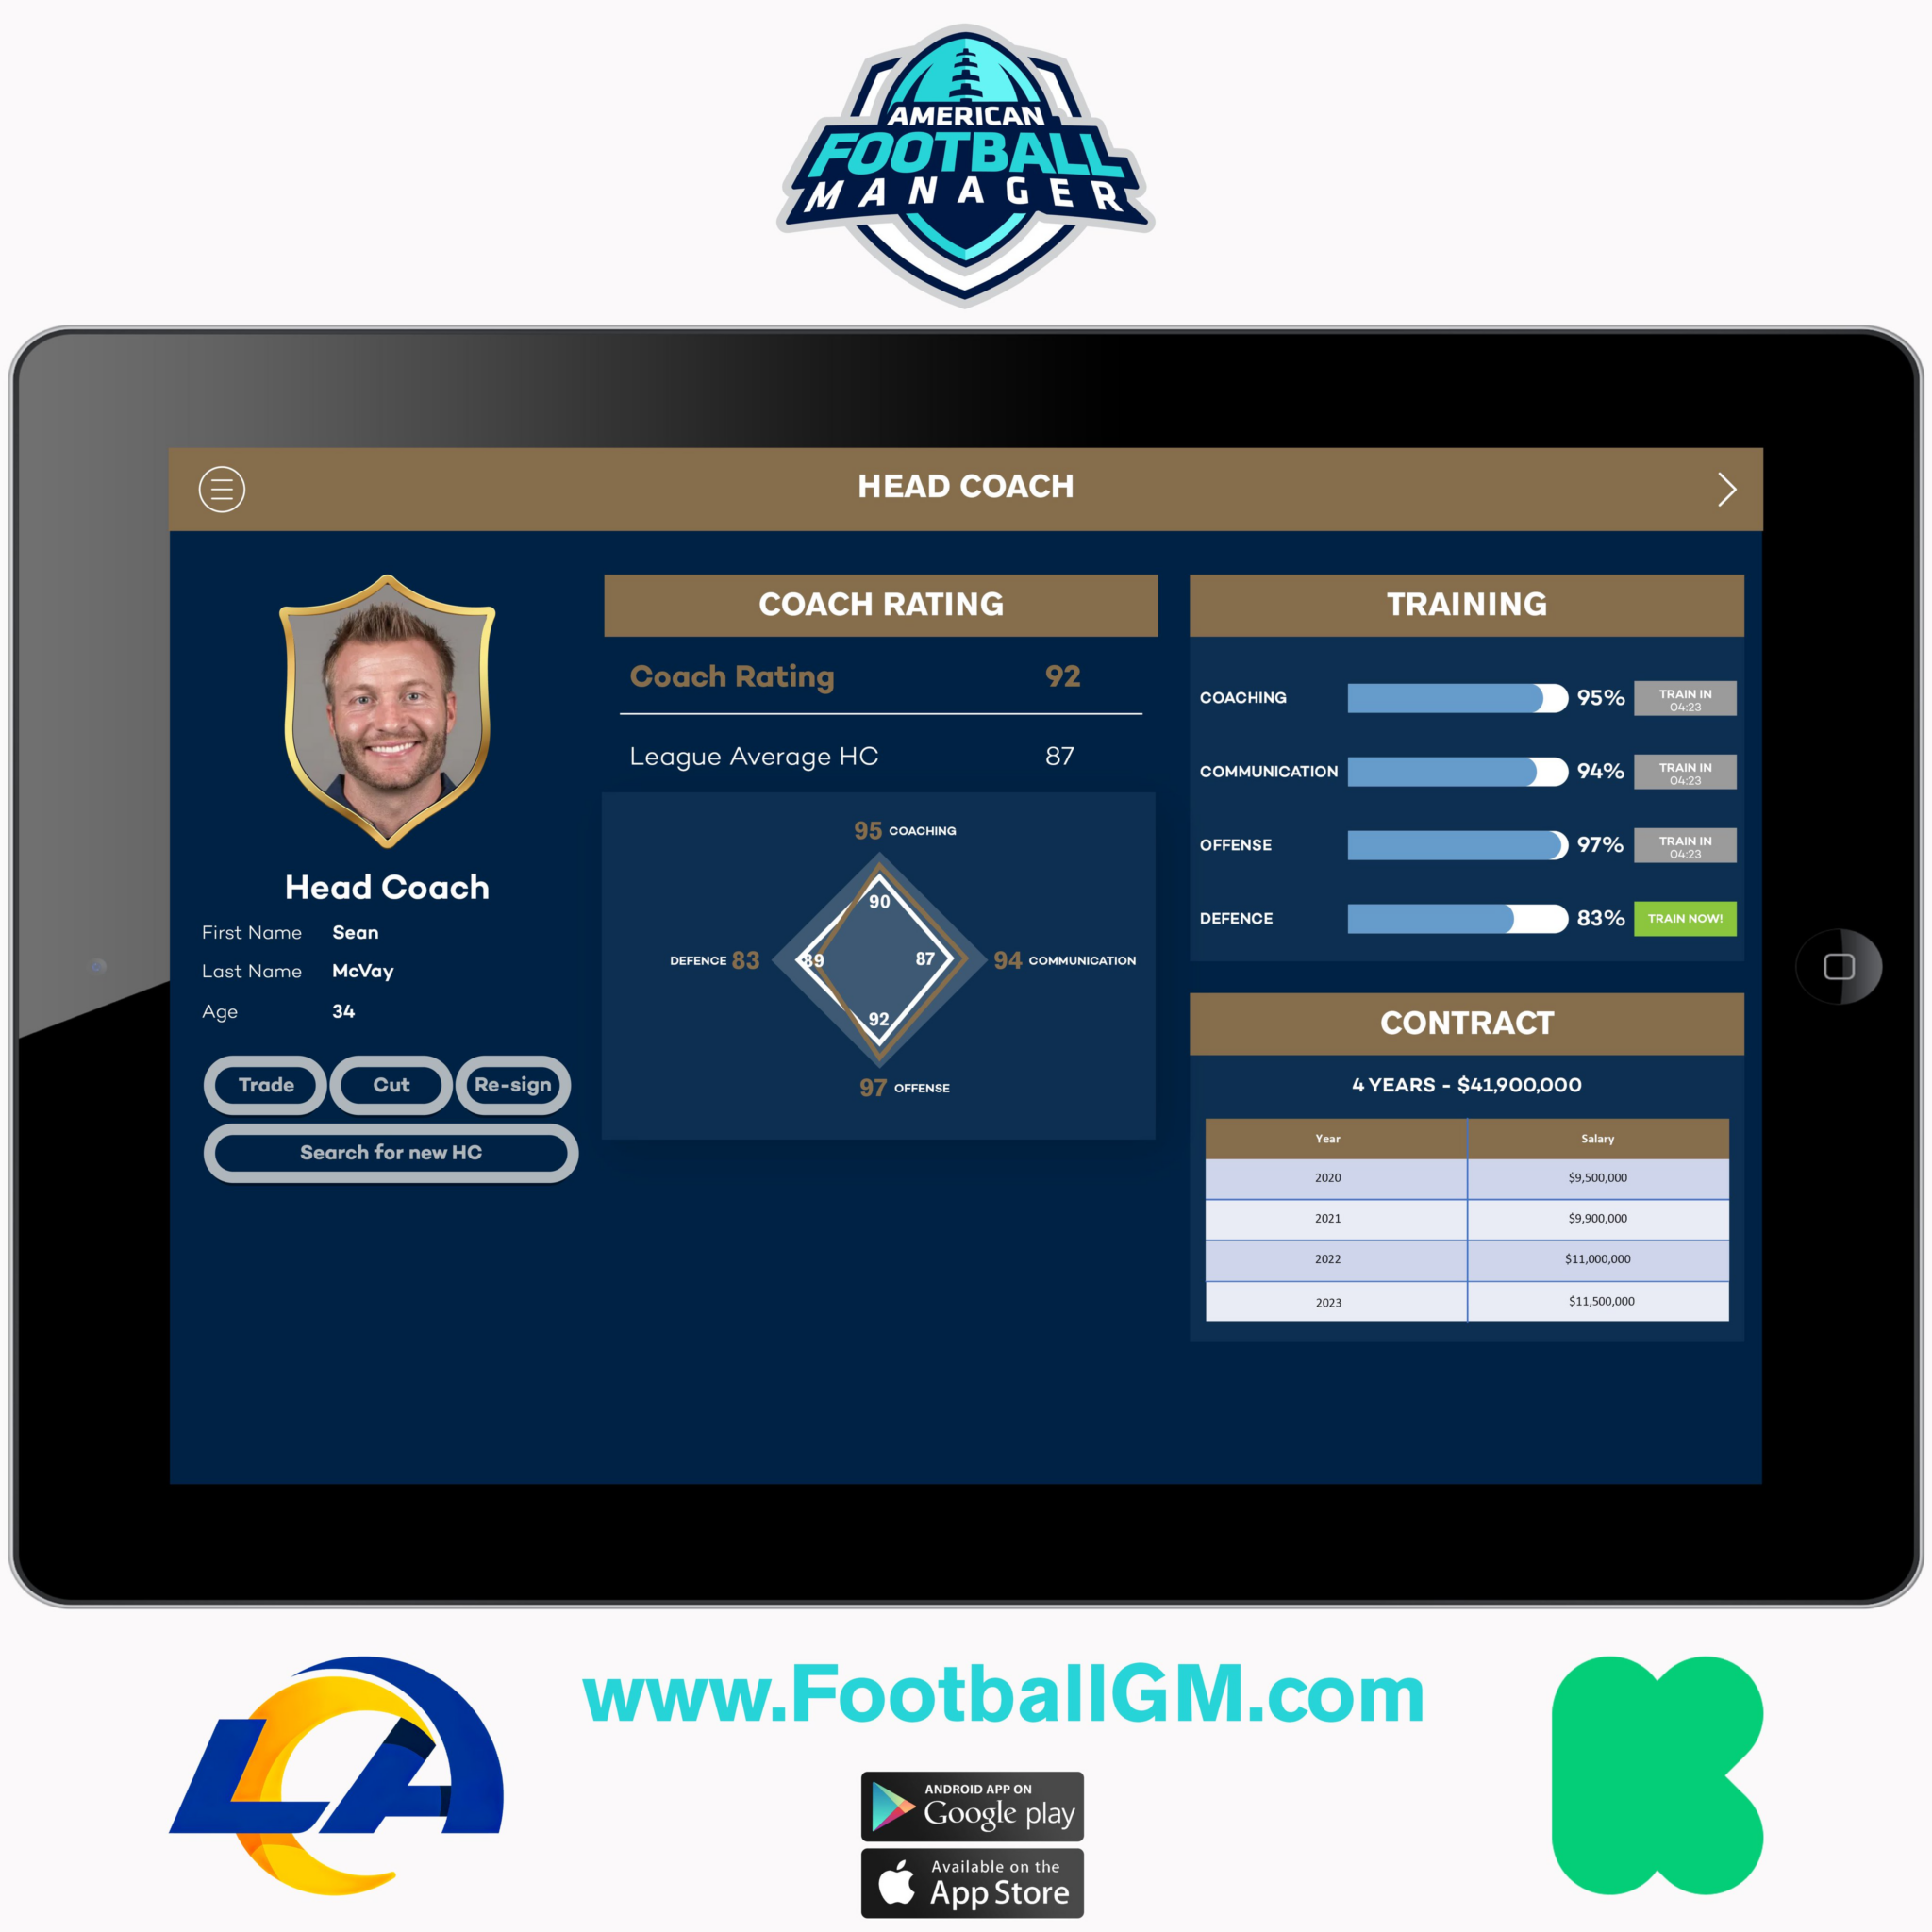 Images - American Football Manager - GM Games - Sports General Manager